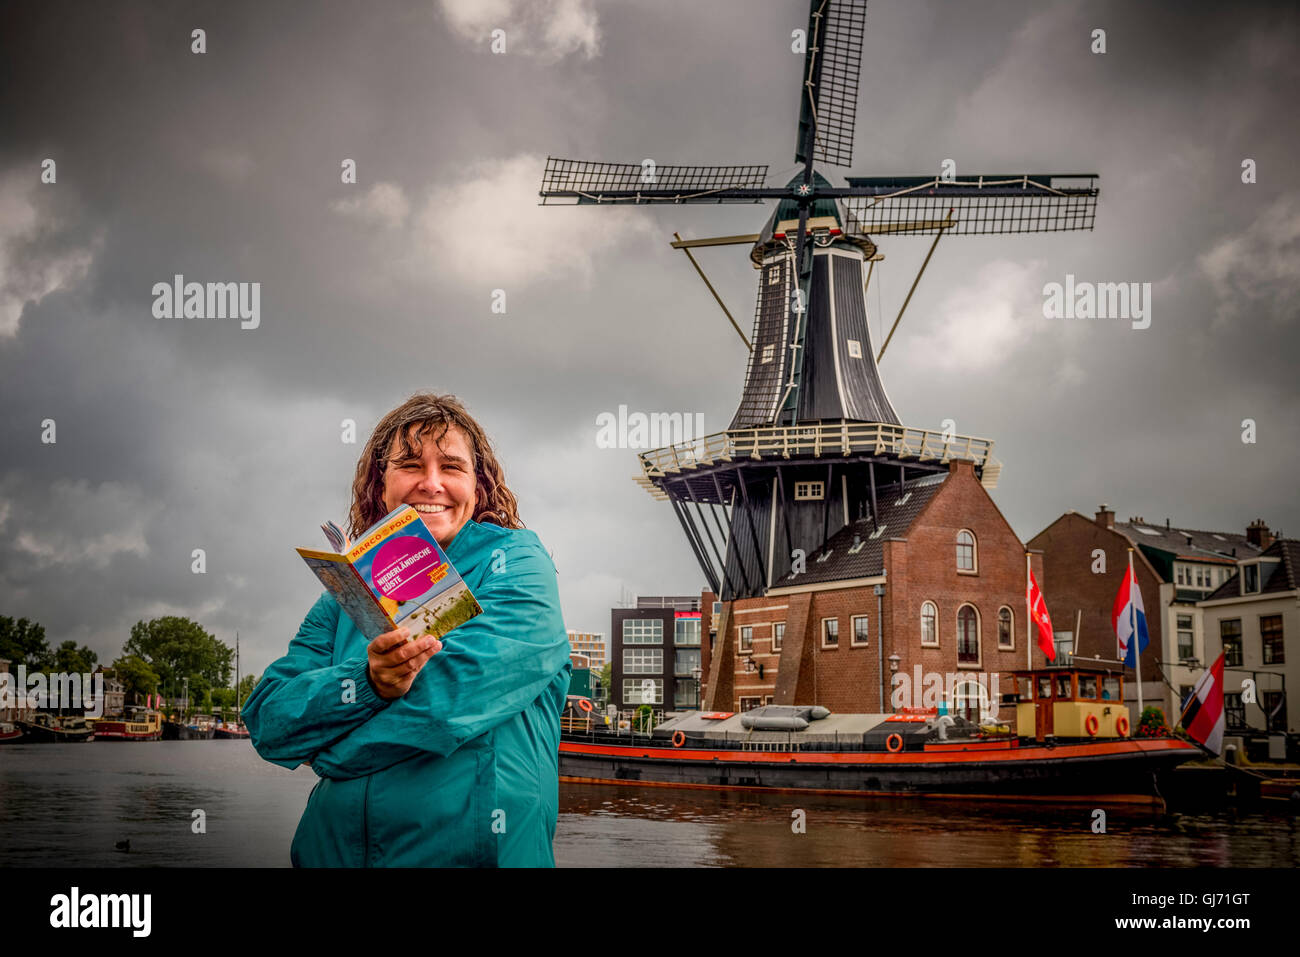 The Netherlands, Haarlem, mill, windmill, De Adriaan, person, woman with guide Stock Photo